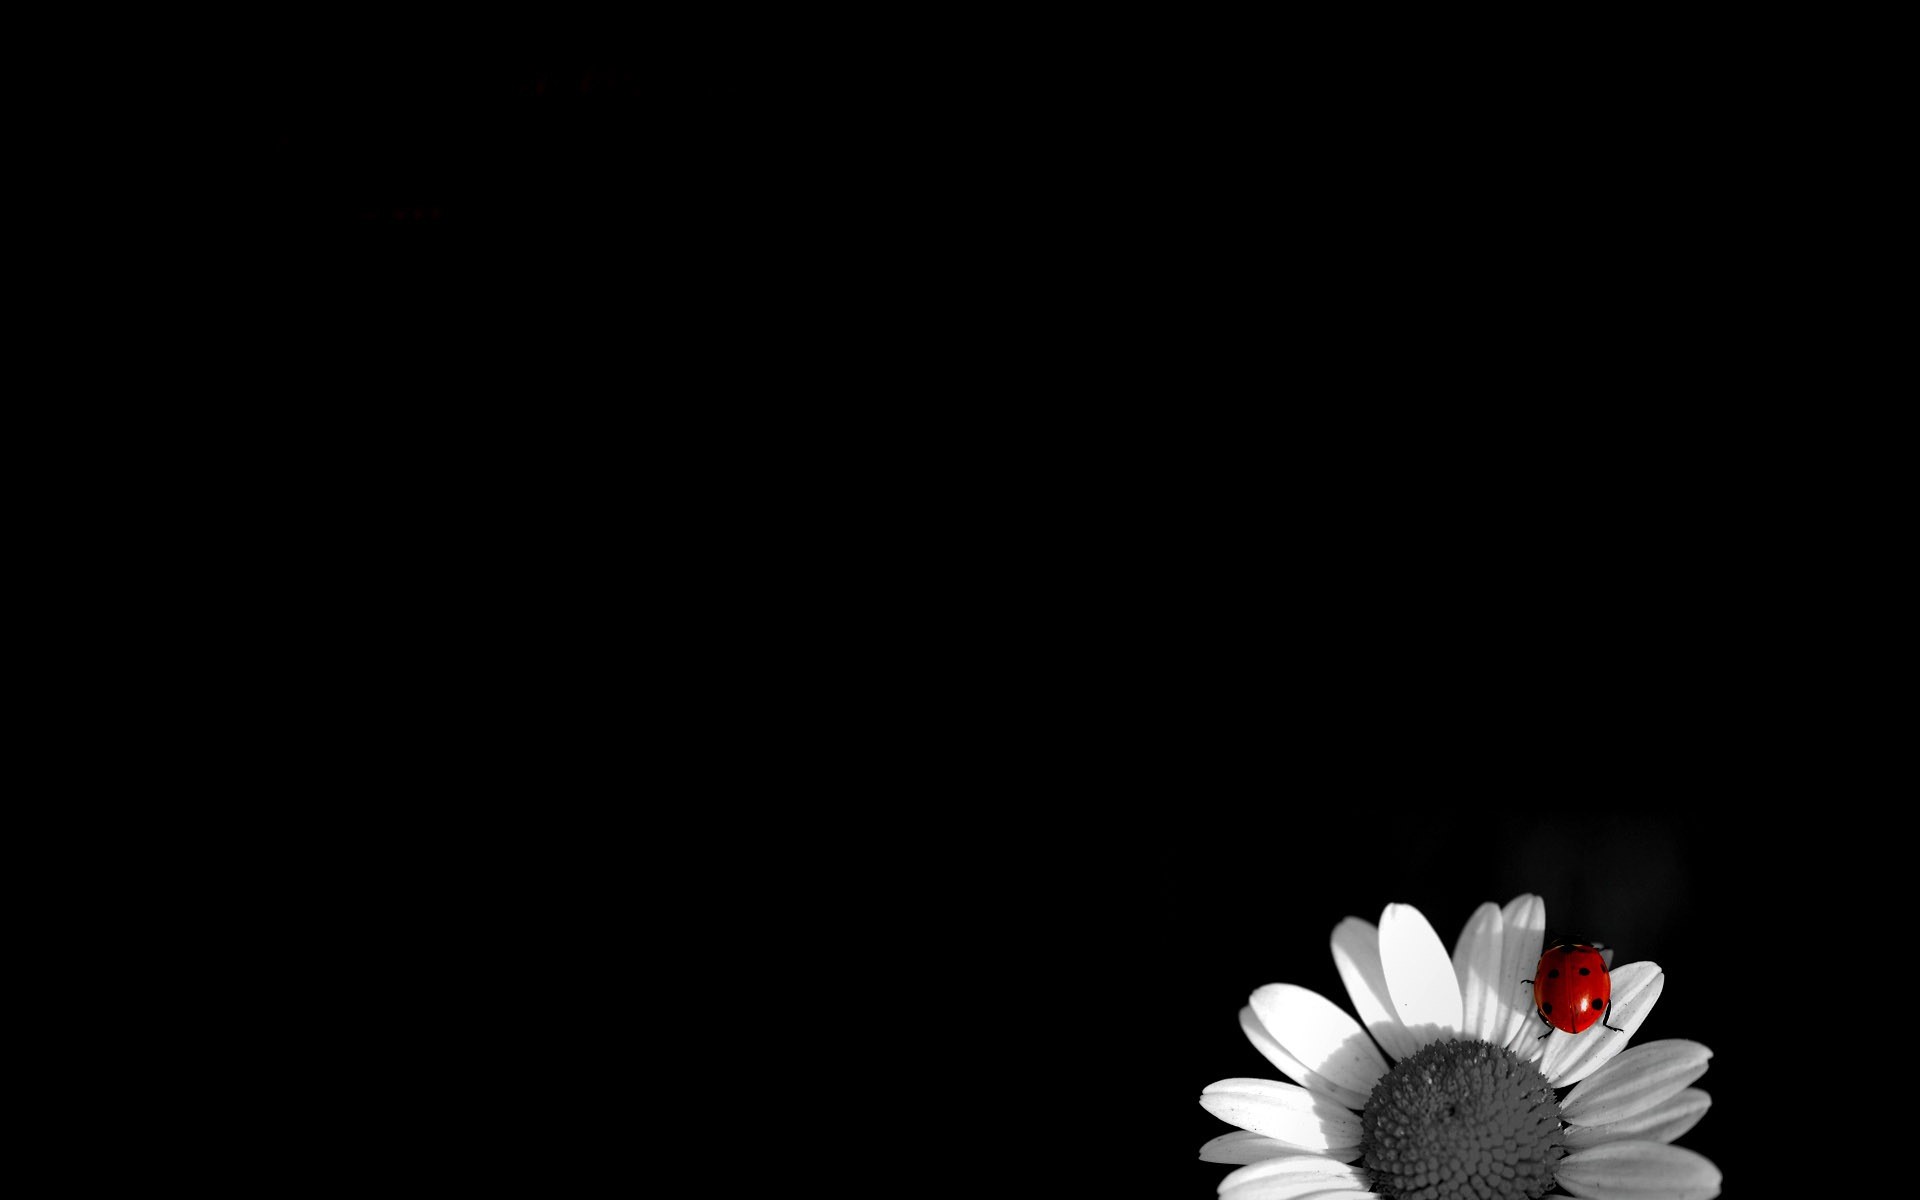 1920x1200 Pictures Gallery for the Black and White Flower Wallpaper HD for Desktop  Downloading Size: 1024Ã768, 1440Ã900, 1600Ã1200